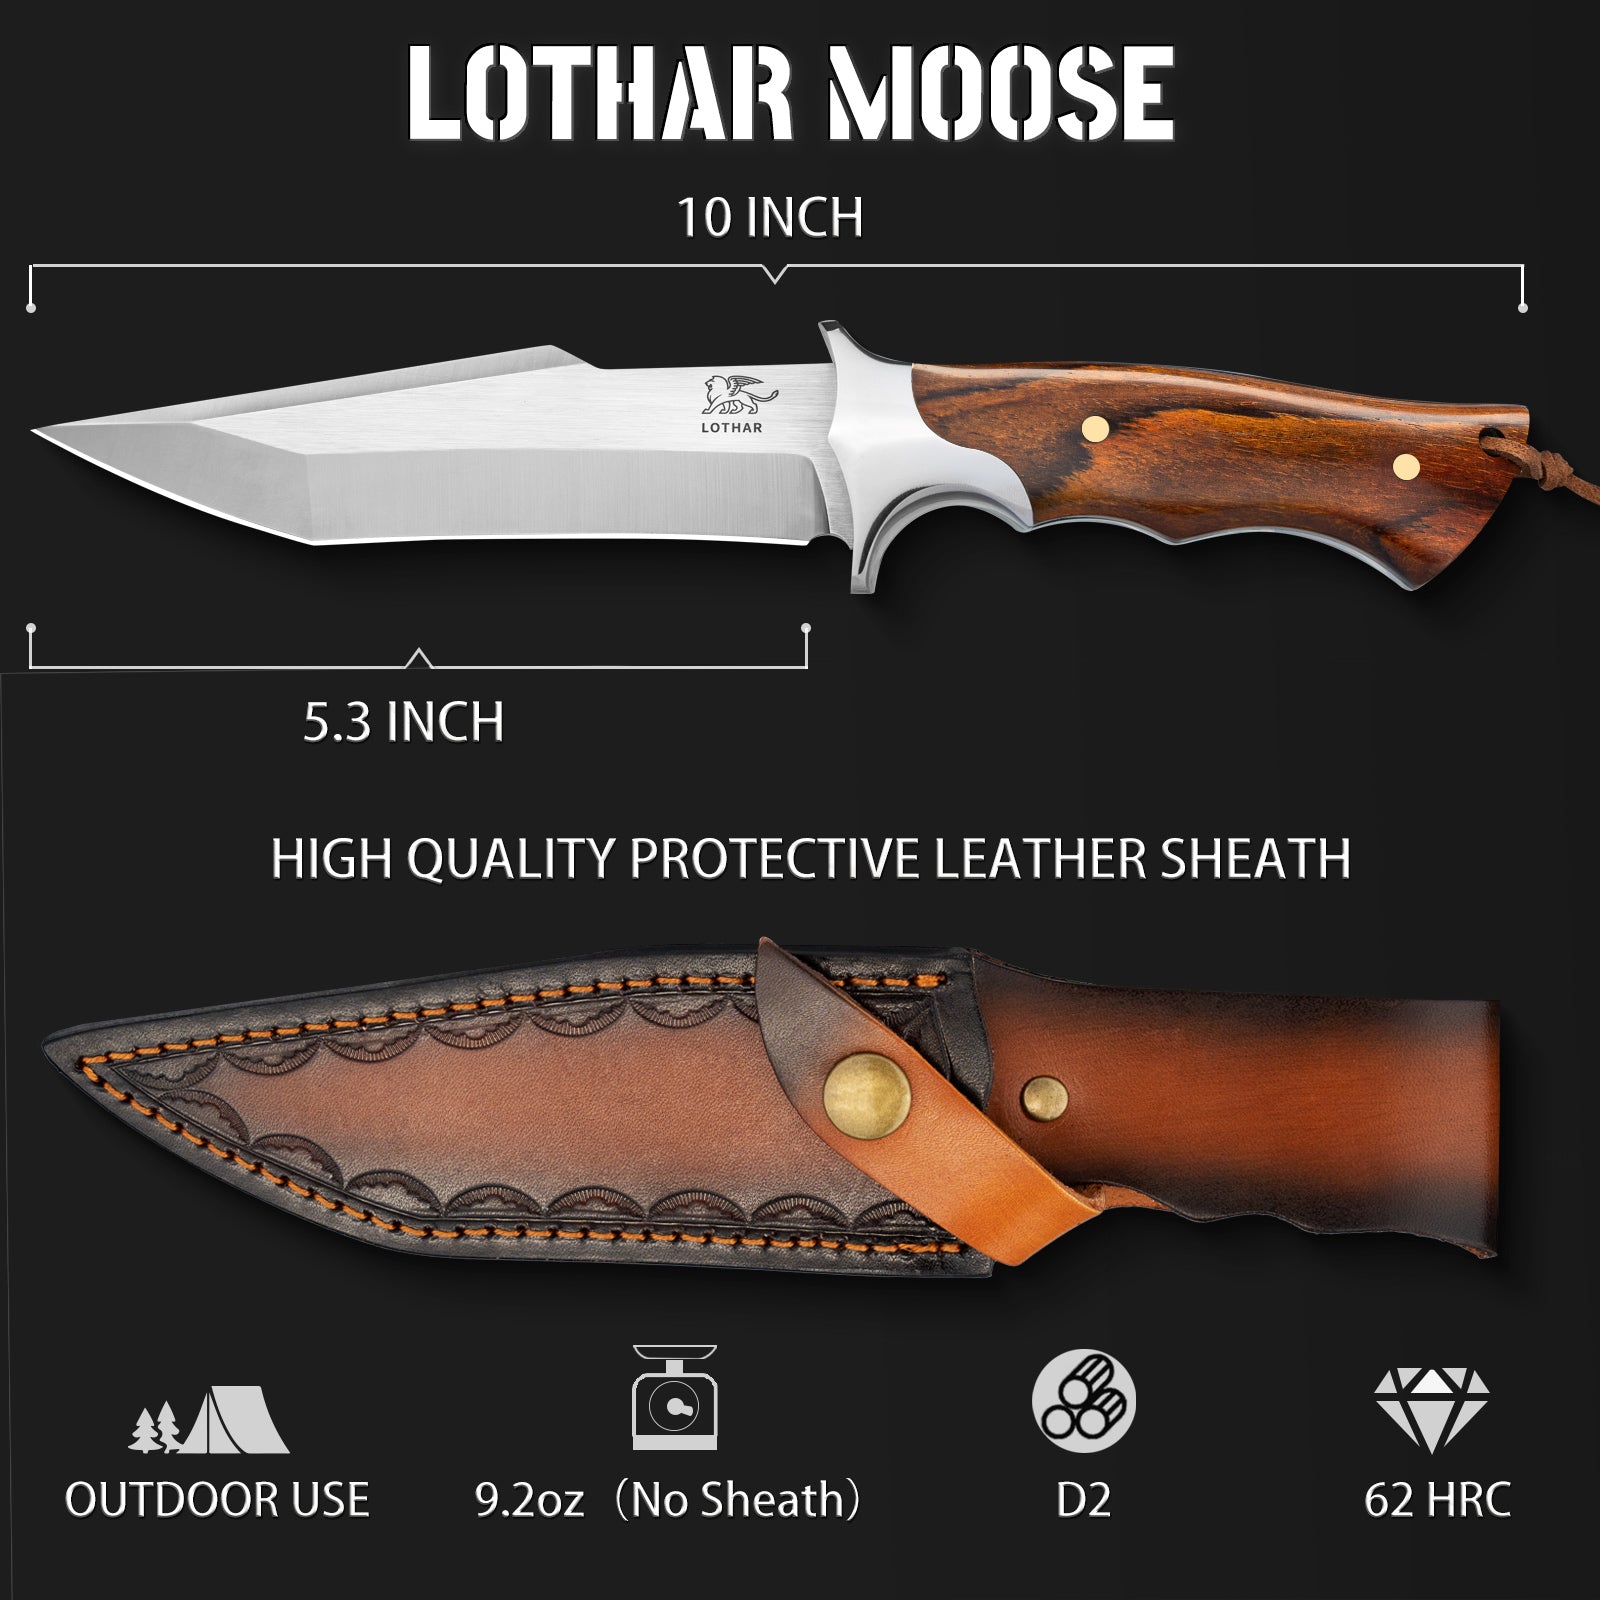 LOTHAR MOOSE Fixed Blade Hunting Knife, 5.3 Inch Sharp D2 Blade Bowie Knife with Leather Sheath, Rosewood Handle, Perfect Helper for Hunting, Camping or Bushcraft